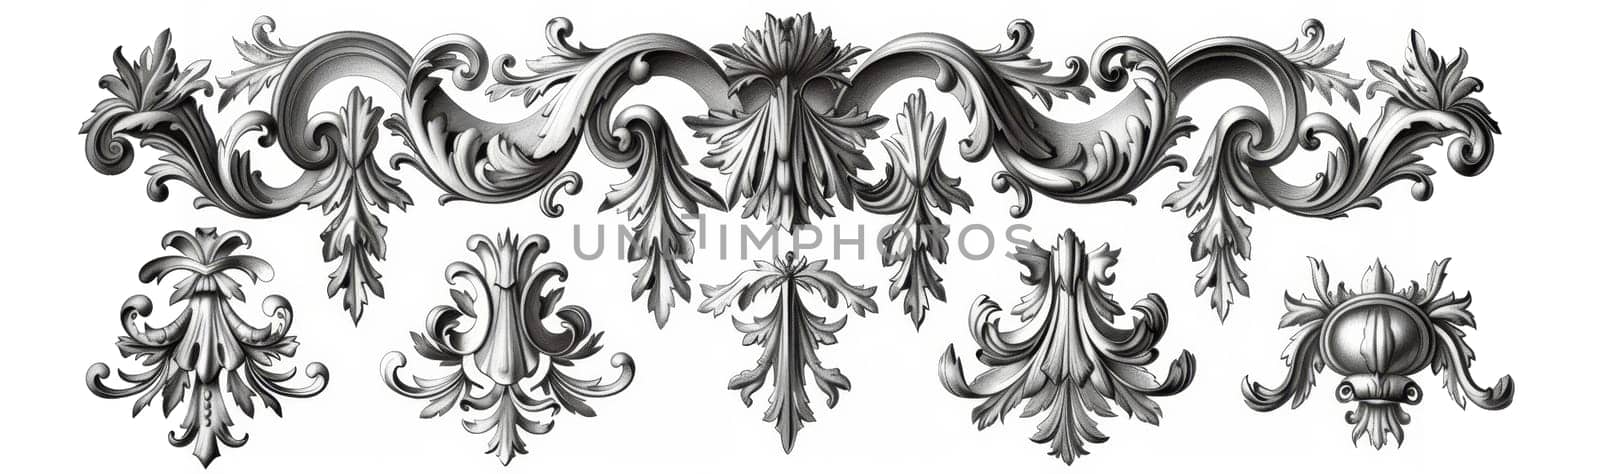 Monochrome swirls and floral patterns stretching across a white background in a seamless design. by sfinks